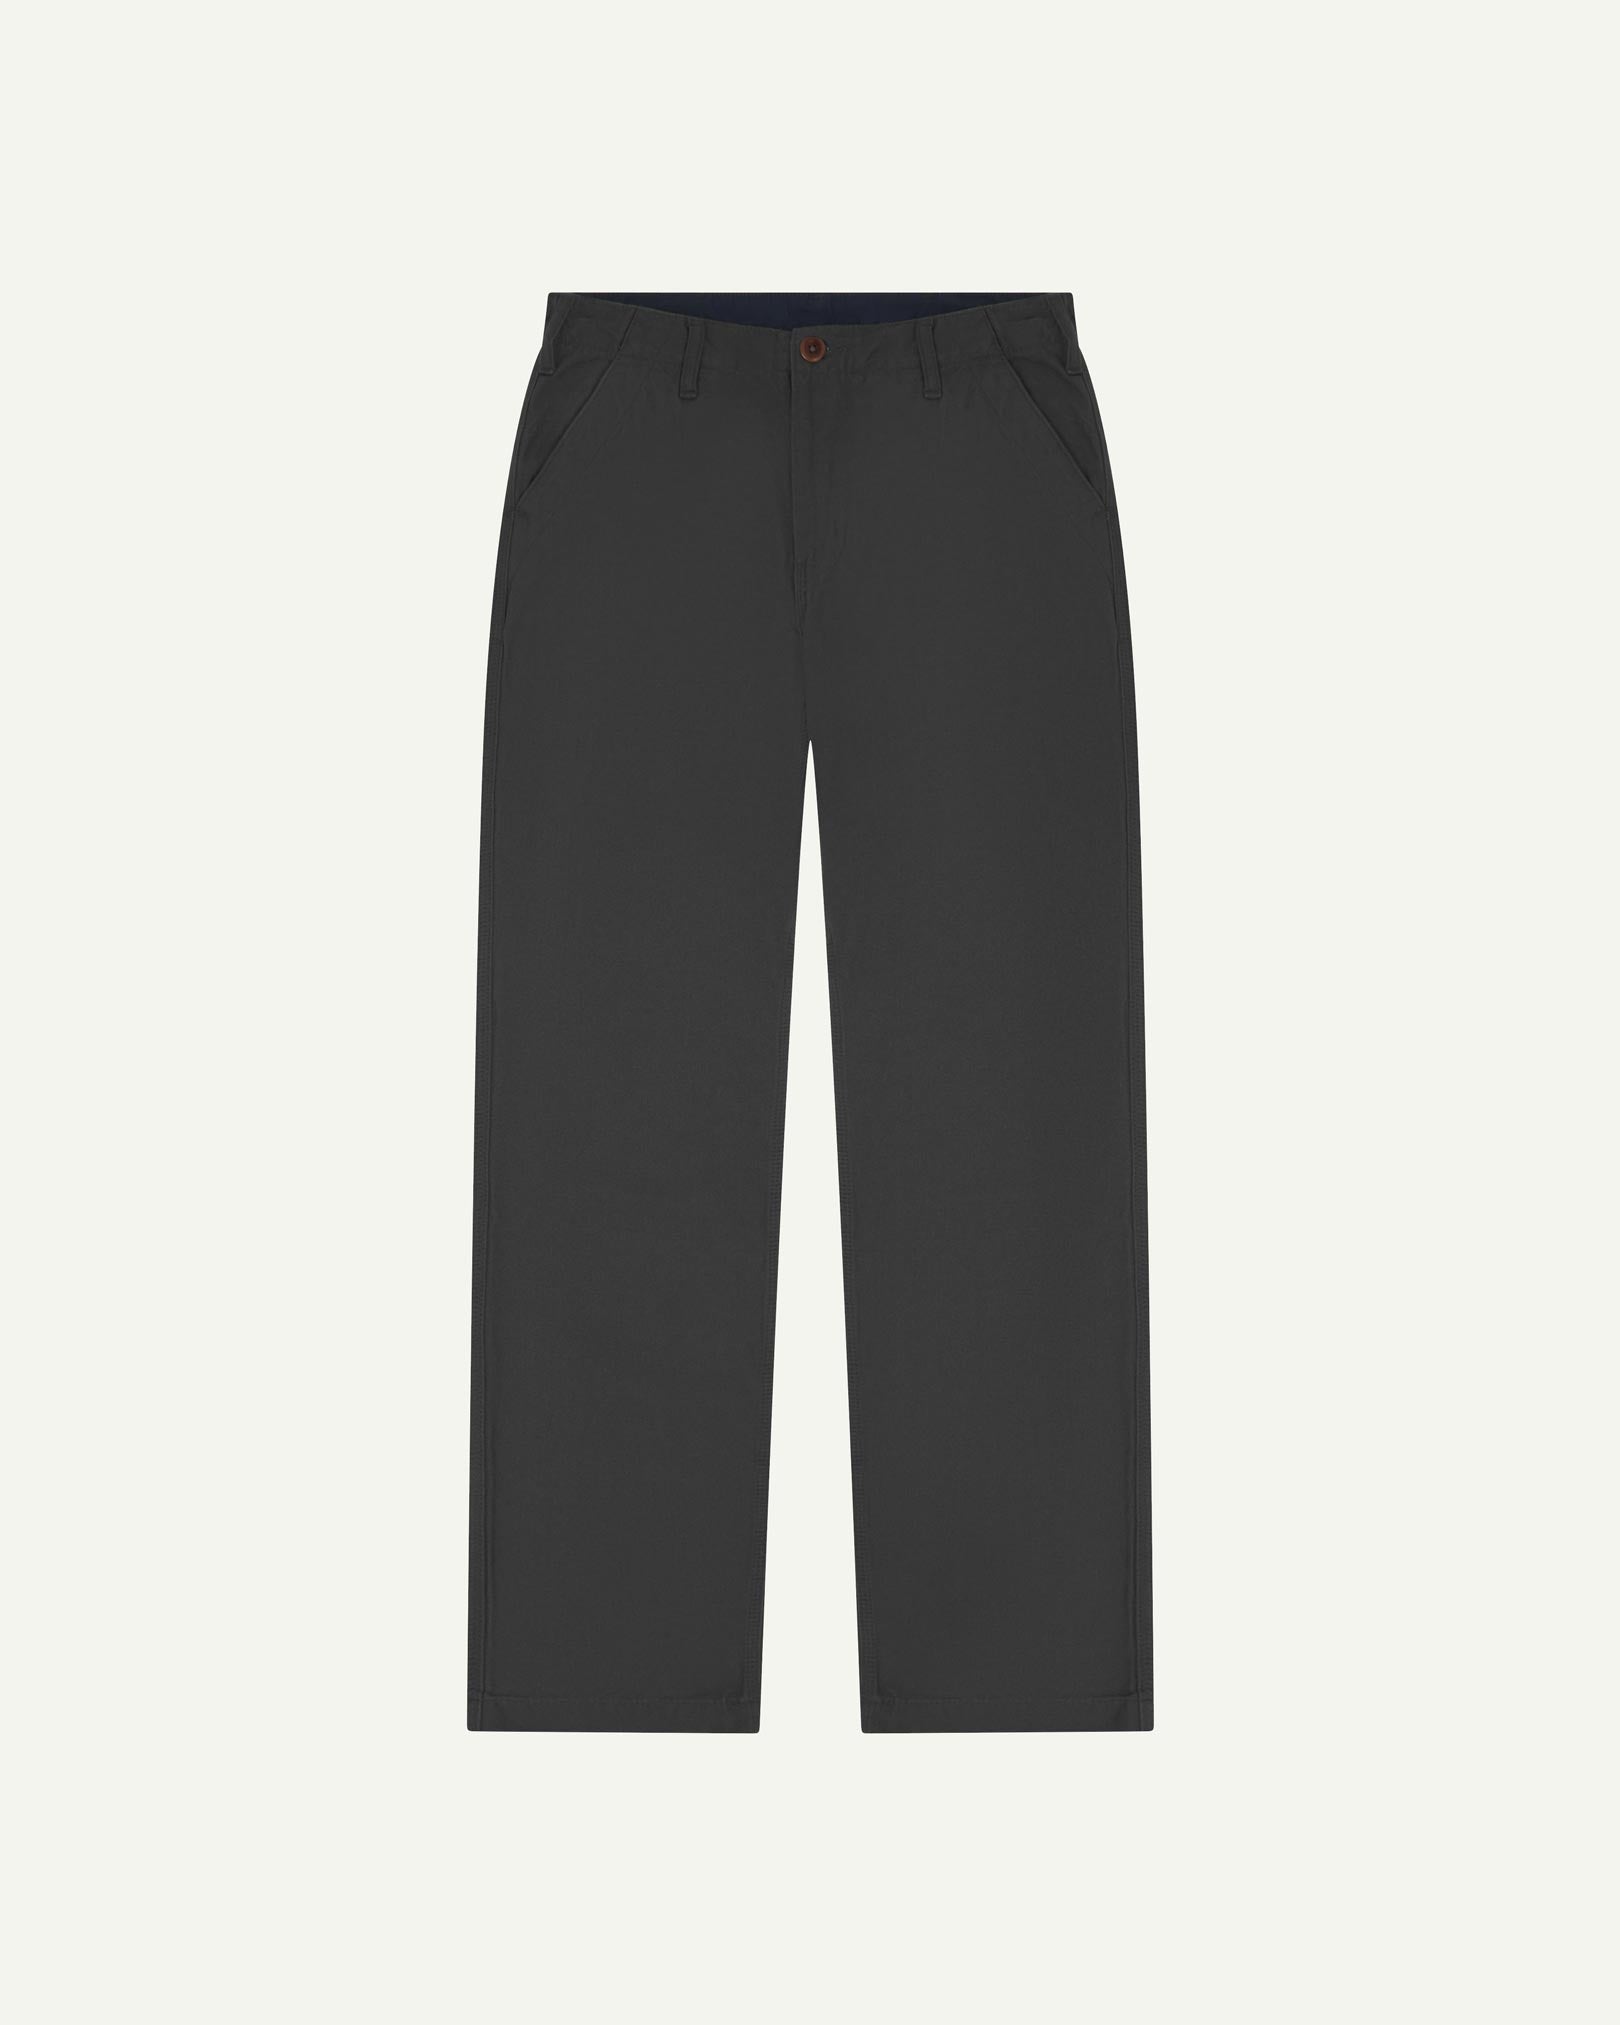 Front flat view of 5005 Uskees men's organic cotton charcoal-grey casual trousers with view of YKK zip fly and Corozo buttons.